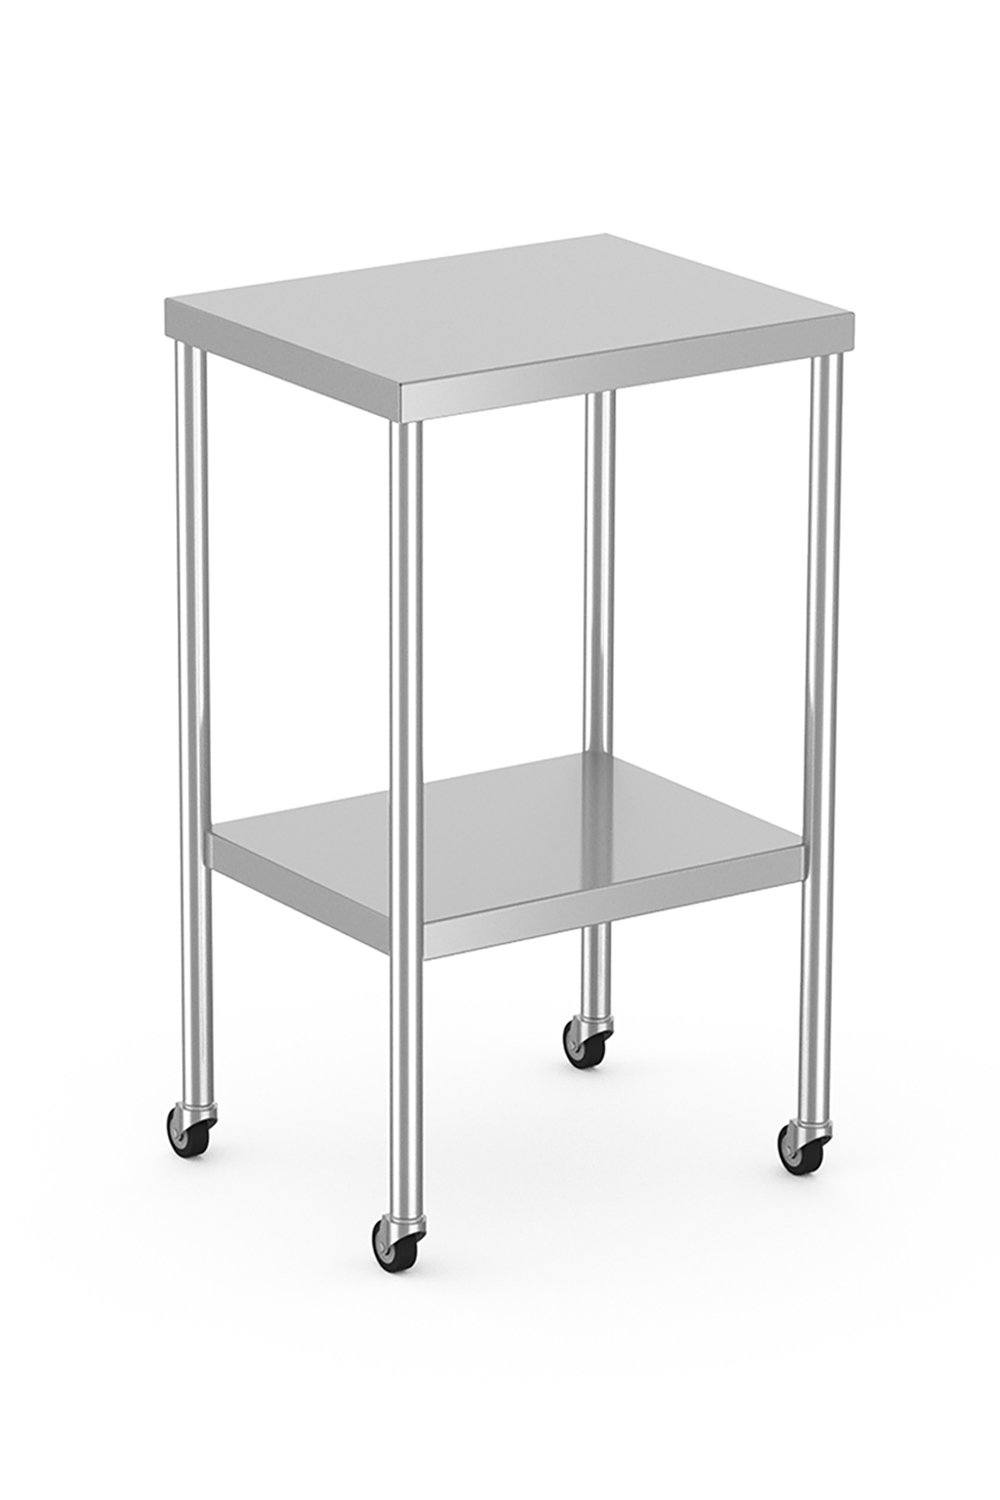 Stainless Steel Table Stainless Solutions Macmedical 16"D x 20"W x 34"H Single, with lid, no footpedal 